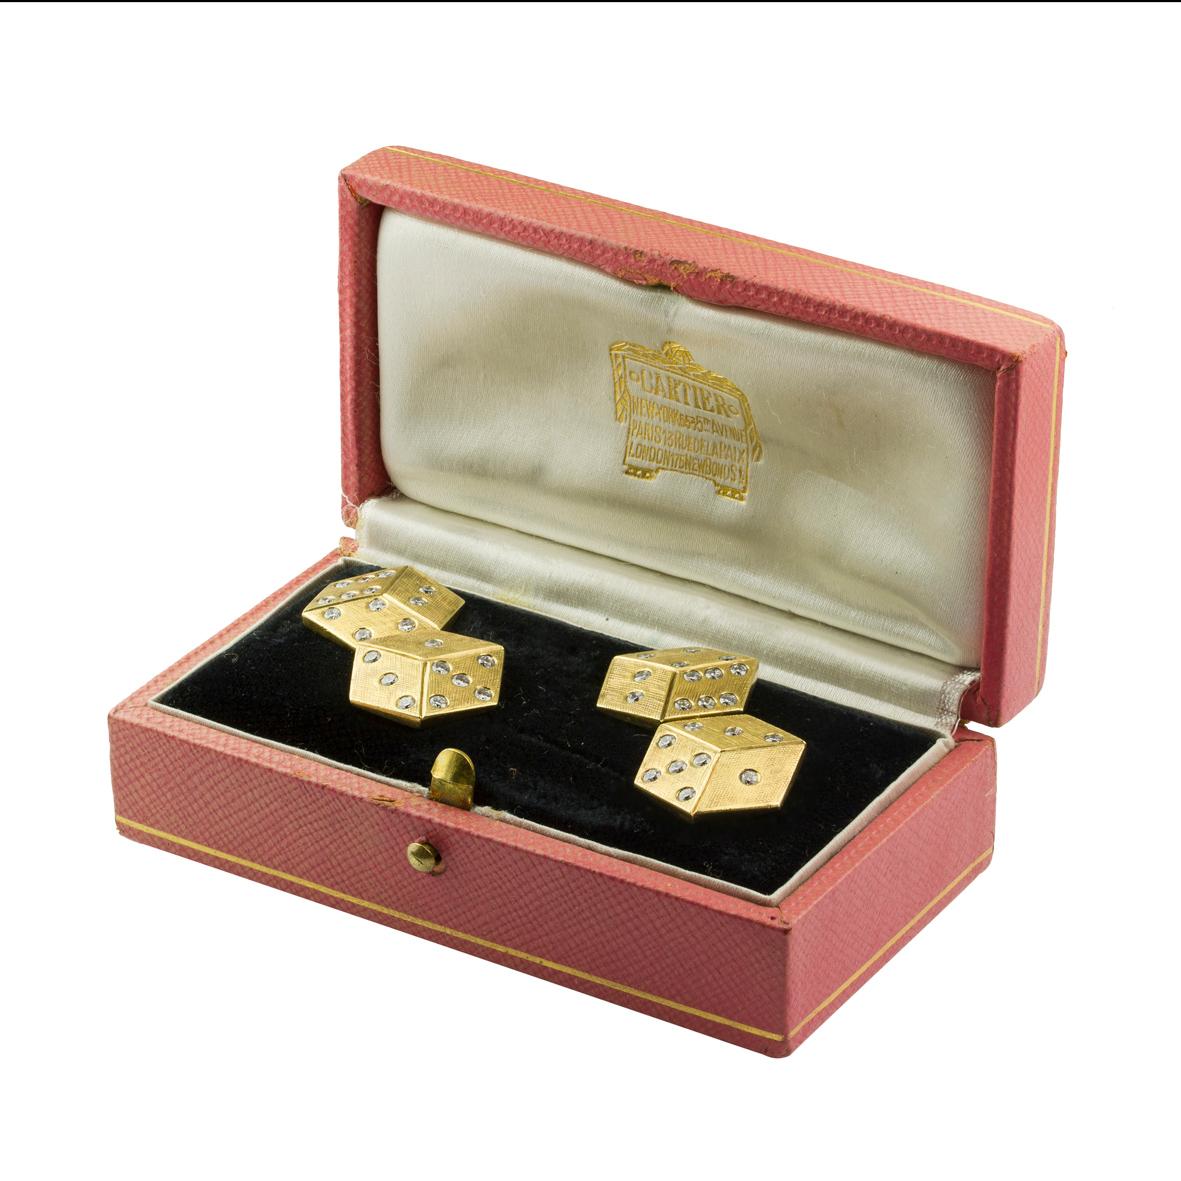 A pair of 1950s Cartier dice cufflinks, each link comprising two three-dimensional cross-etched yellow gold dice, set with round brilliant-cut diamonds, estimated to weigh a total of 0.55 carats, with chain link connections, signed Cartier, gross